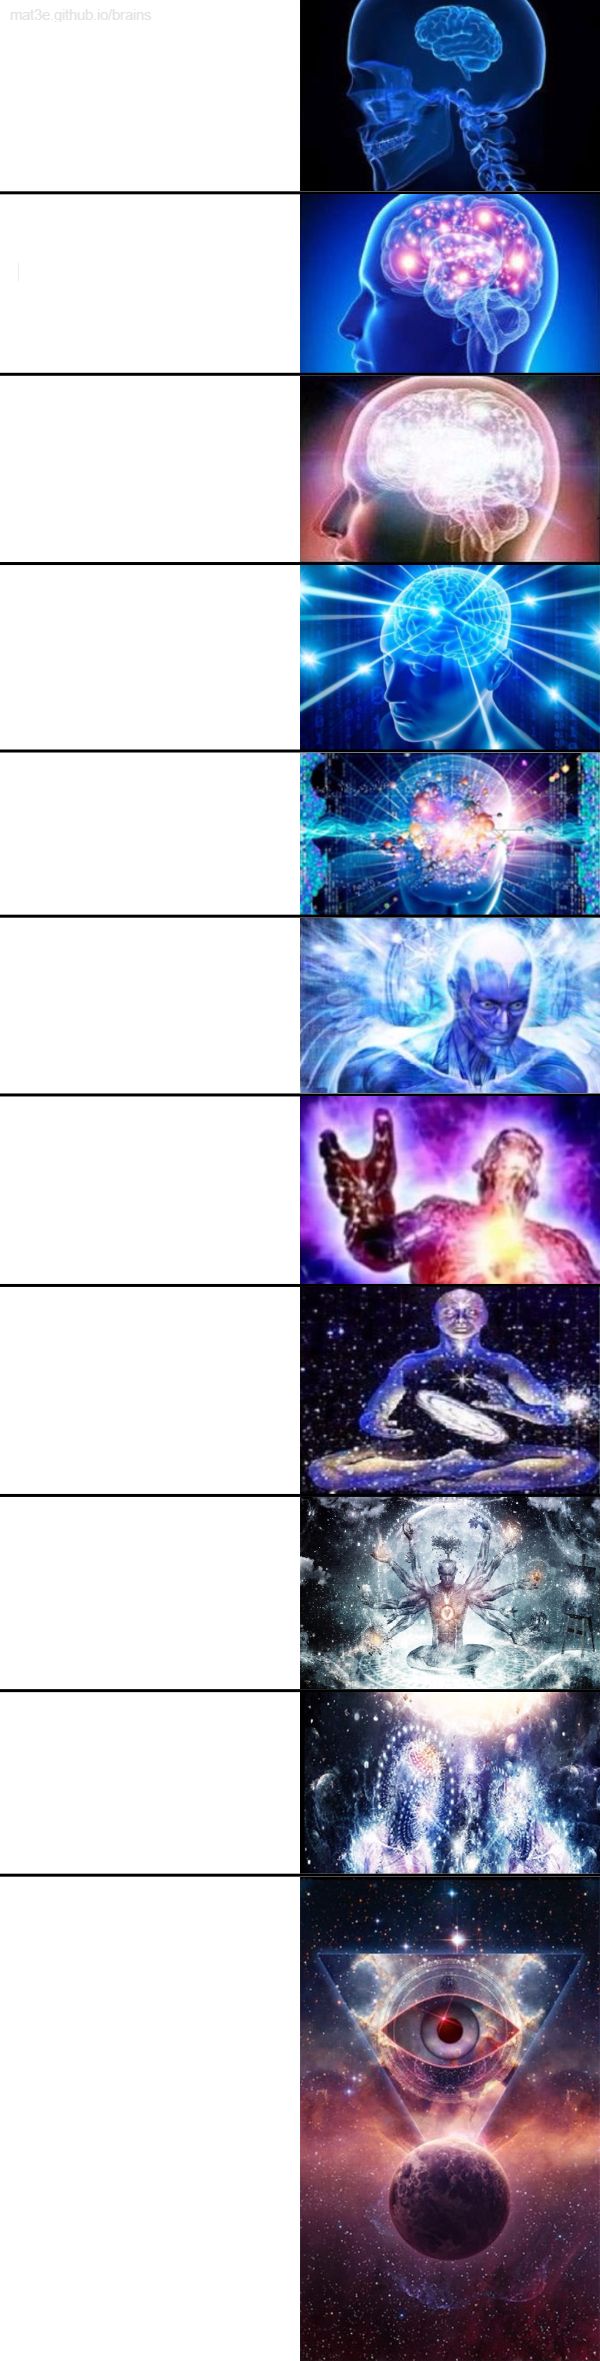 High Quality Expanded '' Expanding brain '' Blank Meme Template